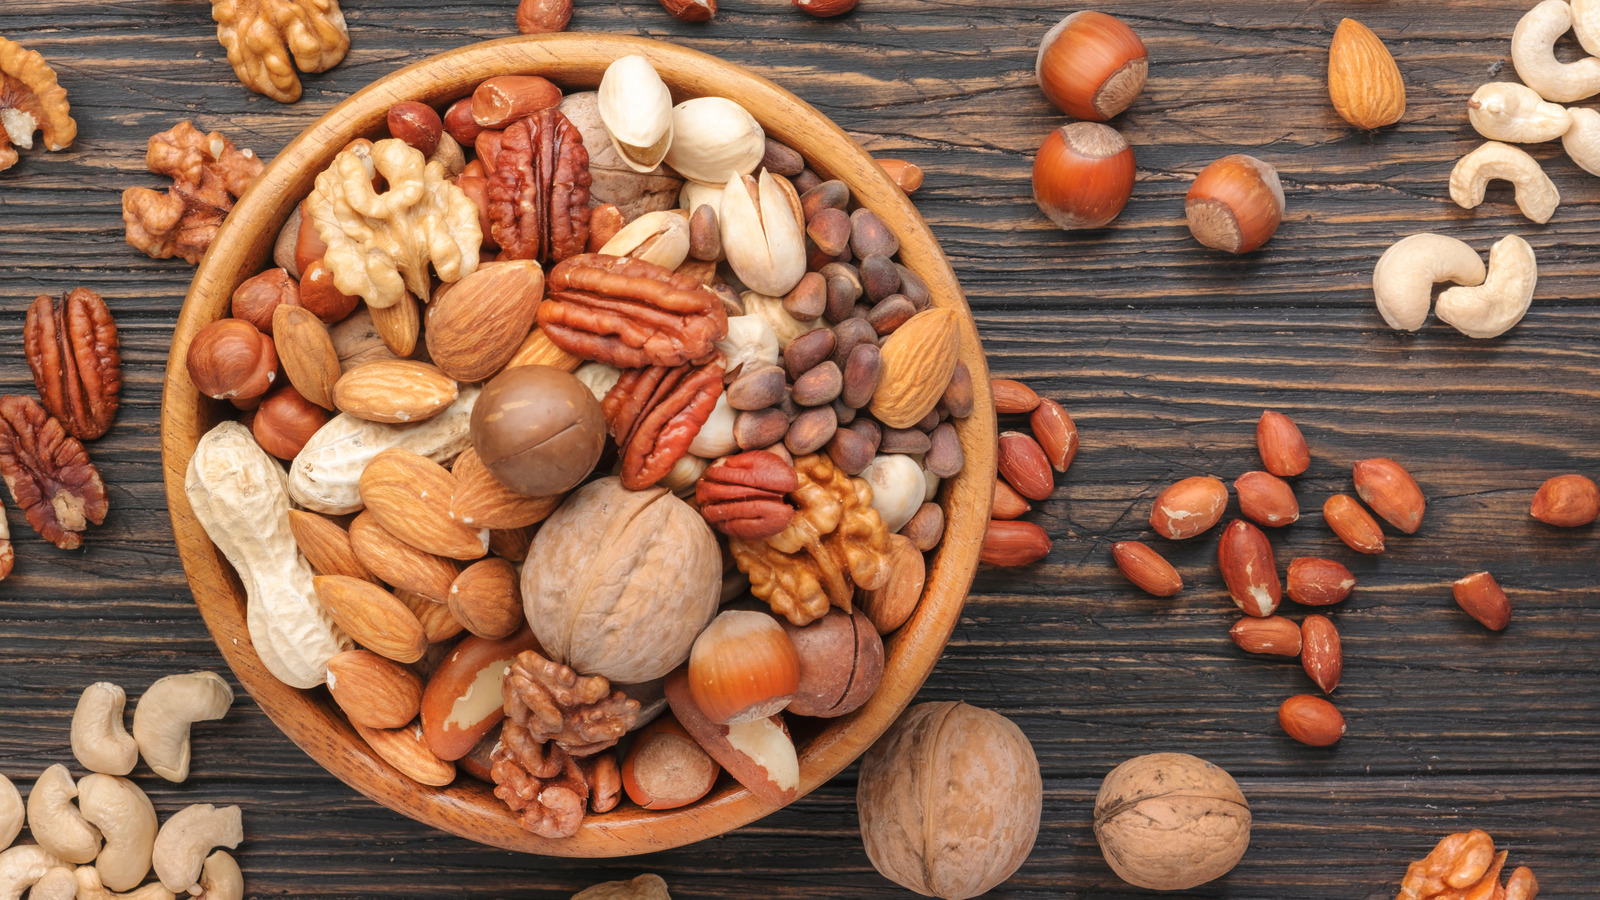 How to Choose, Store and Eat Nuts - Unlock Food